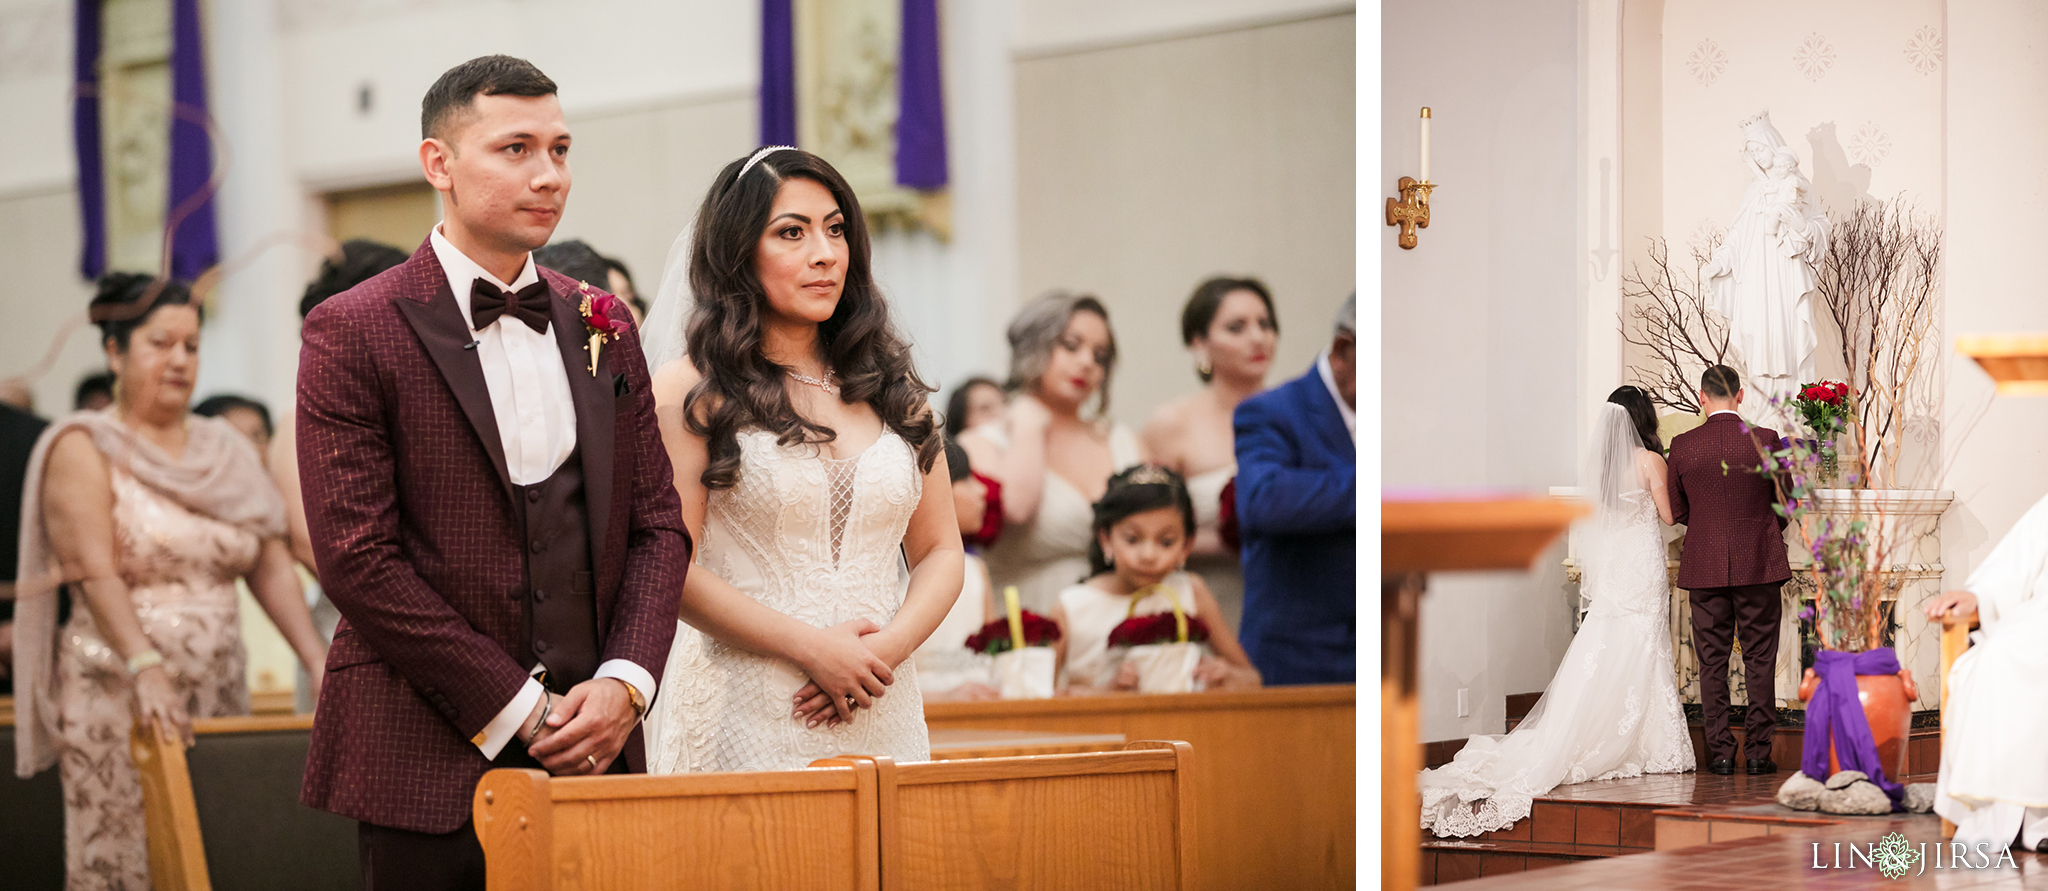 09 Lady Of Perpetual Help Bagramian Hall Los Angeles County Wedding Photography